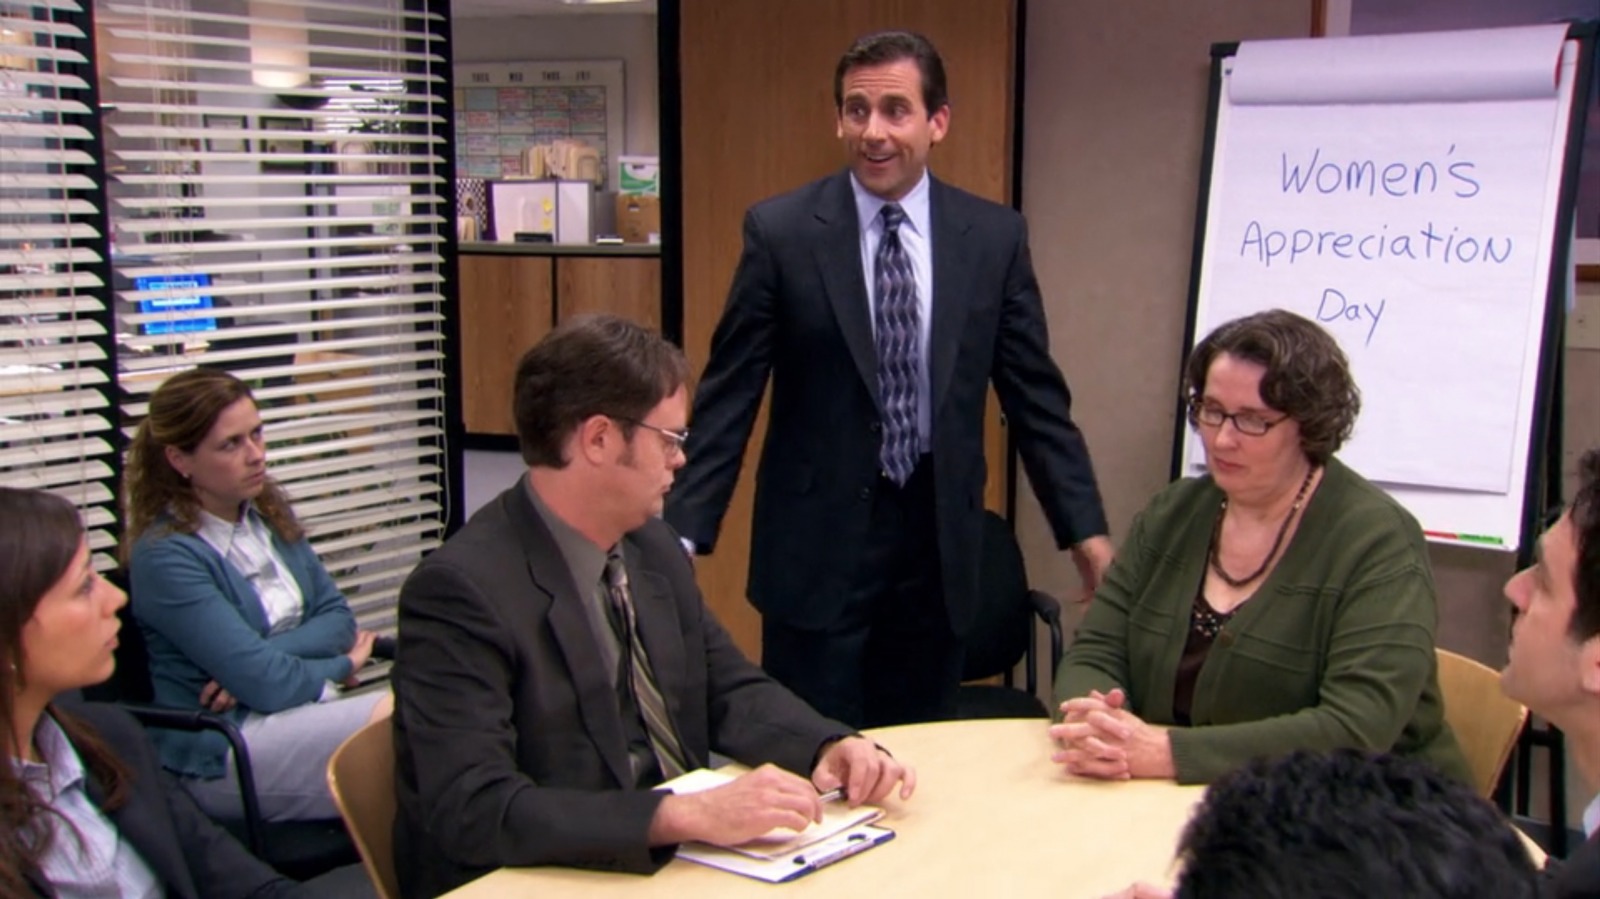 The Shocking Real Life Story That Inspired The Office's Women's  Appreciation Episode